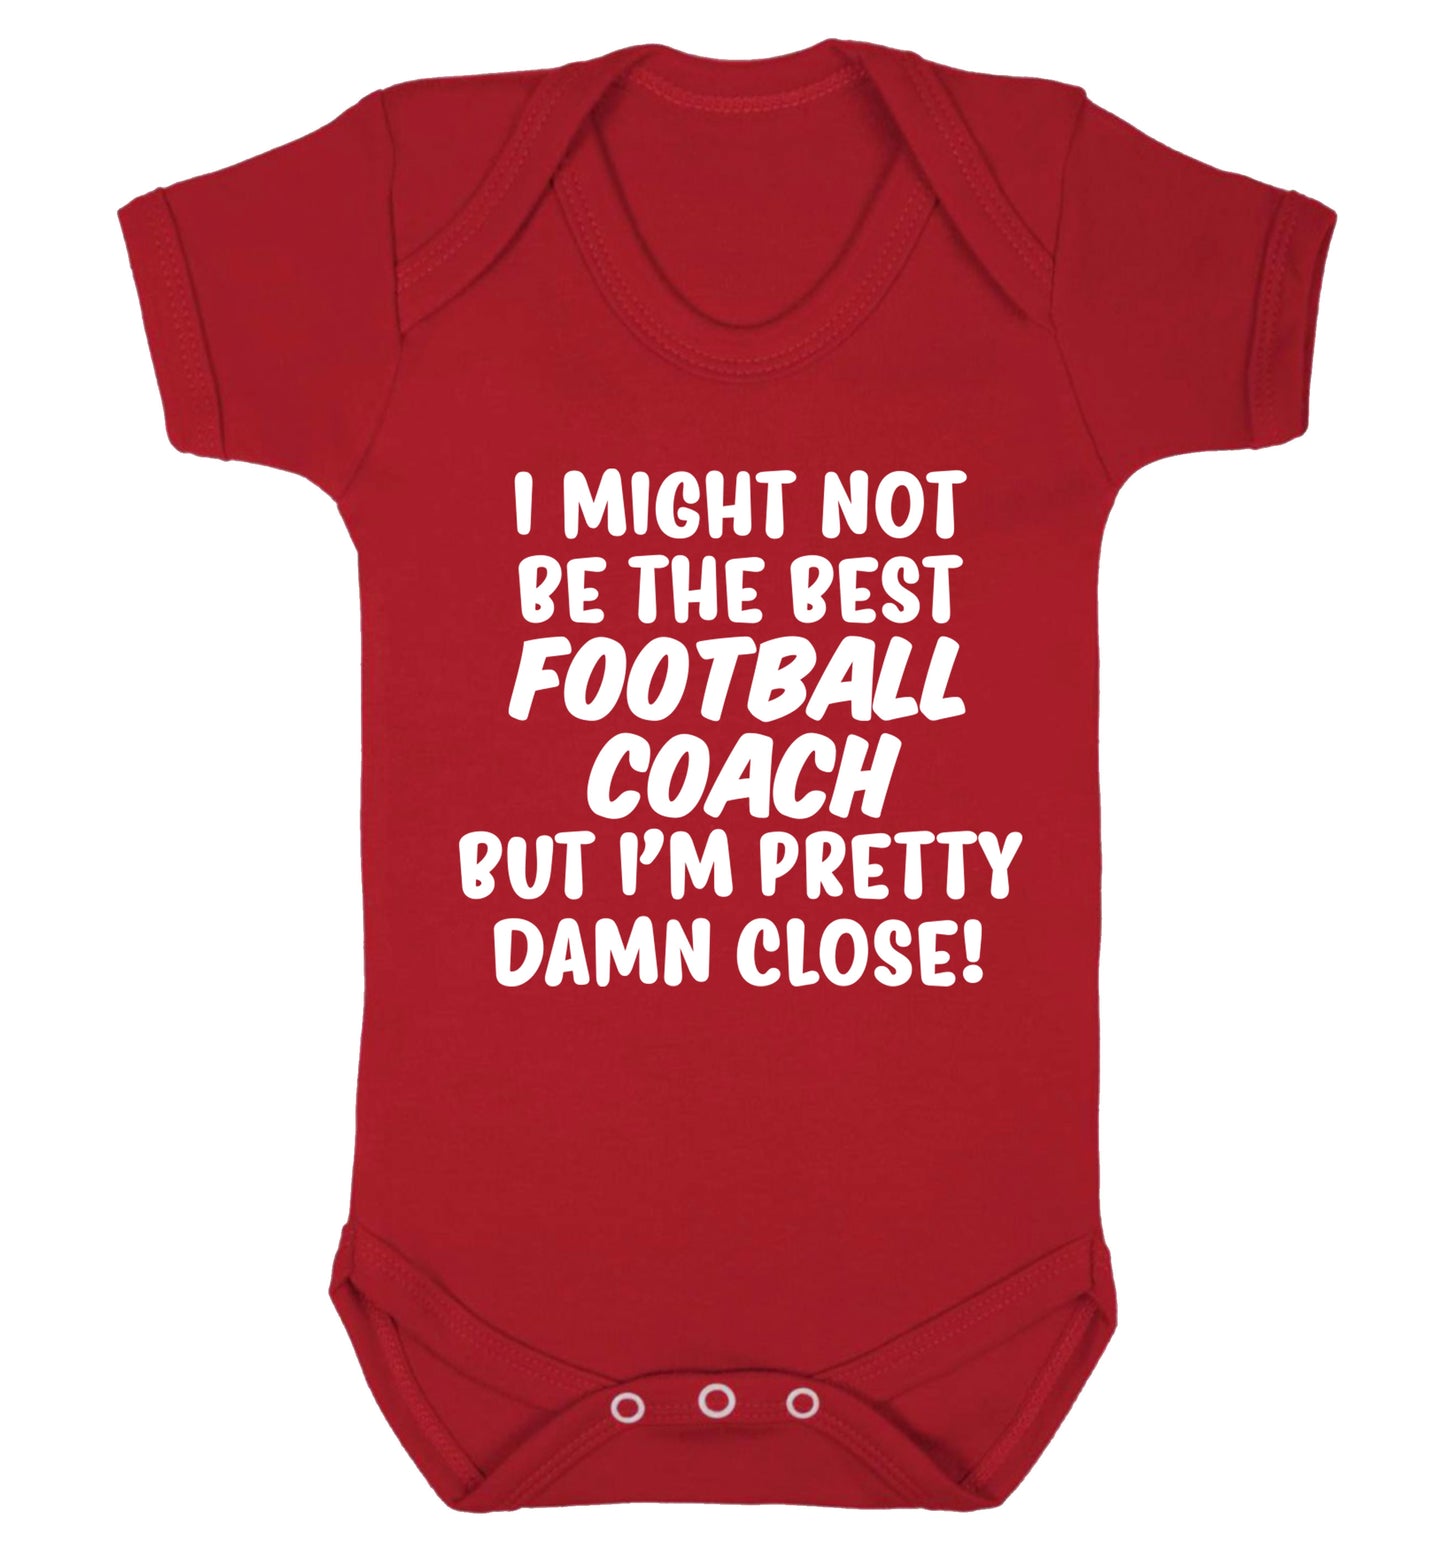 I might not be the best football coach but I'm pretty close! Baby Vest red 18-24 months